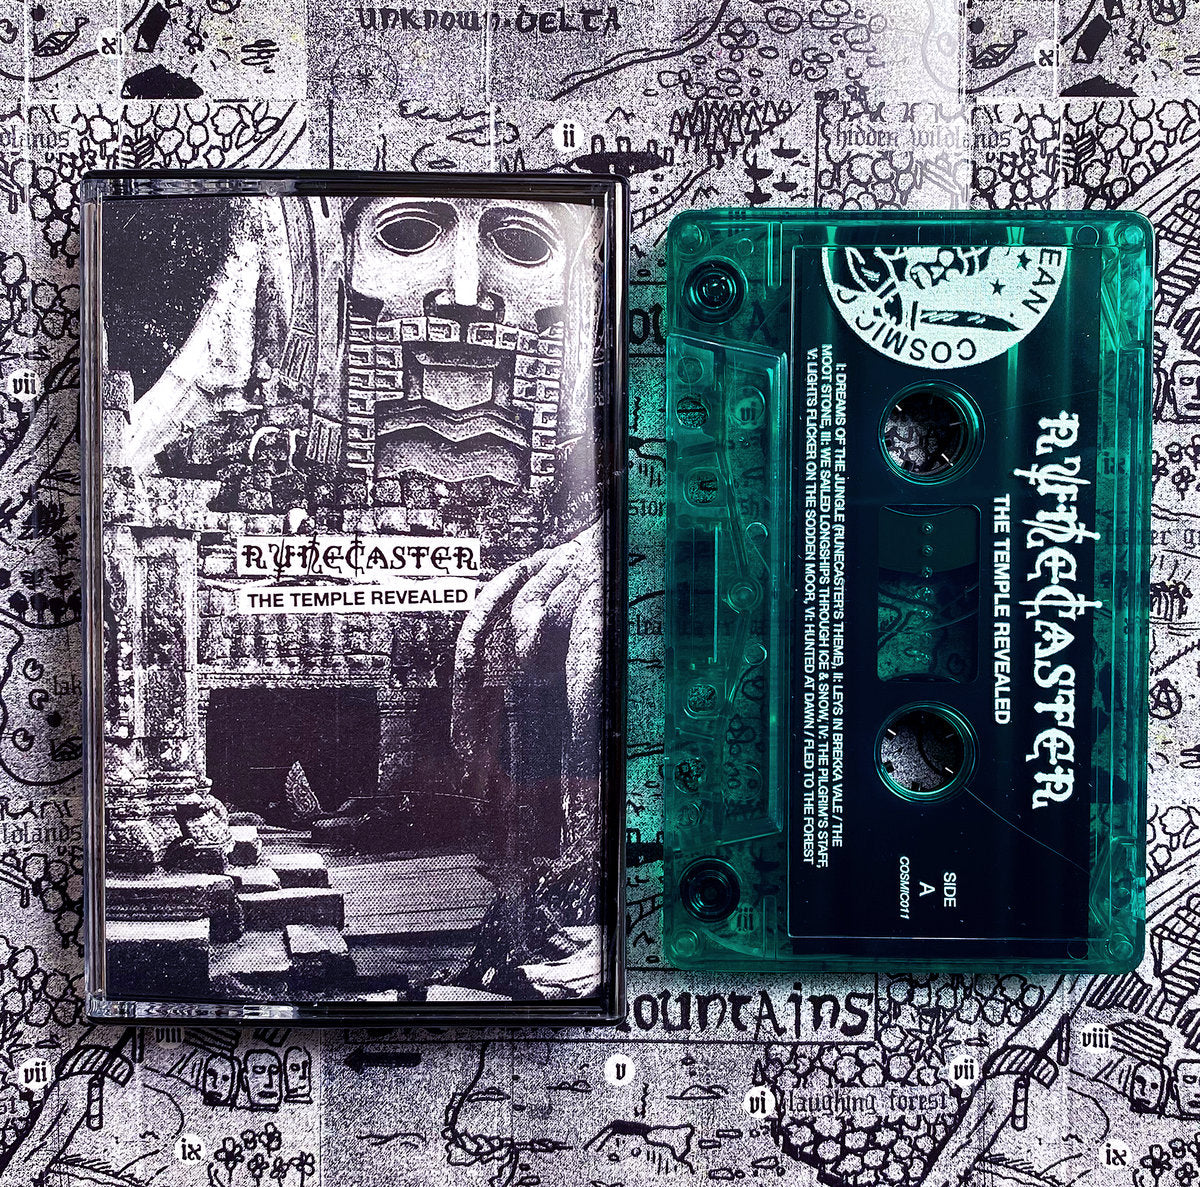 [SOLD OUT]RUNECASTER "The Temple Revealed" cassette tape (lim.50)